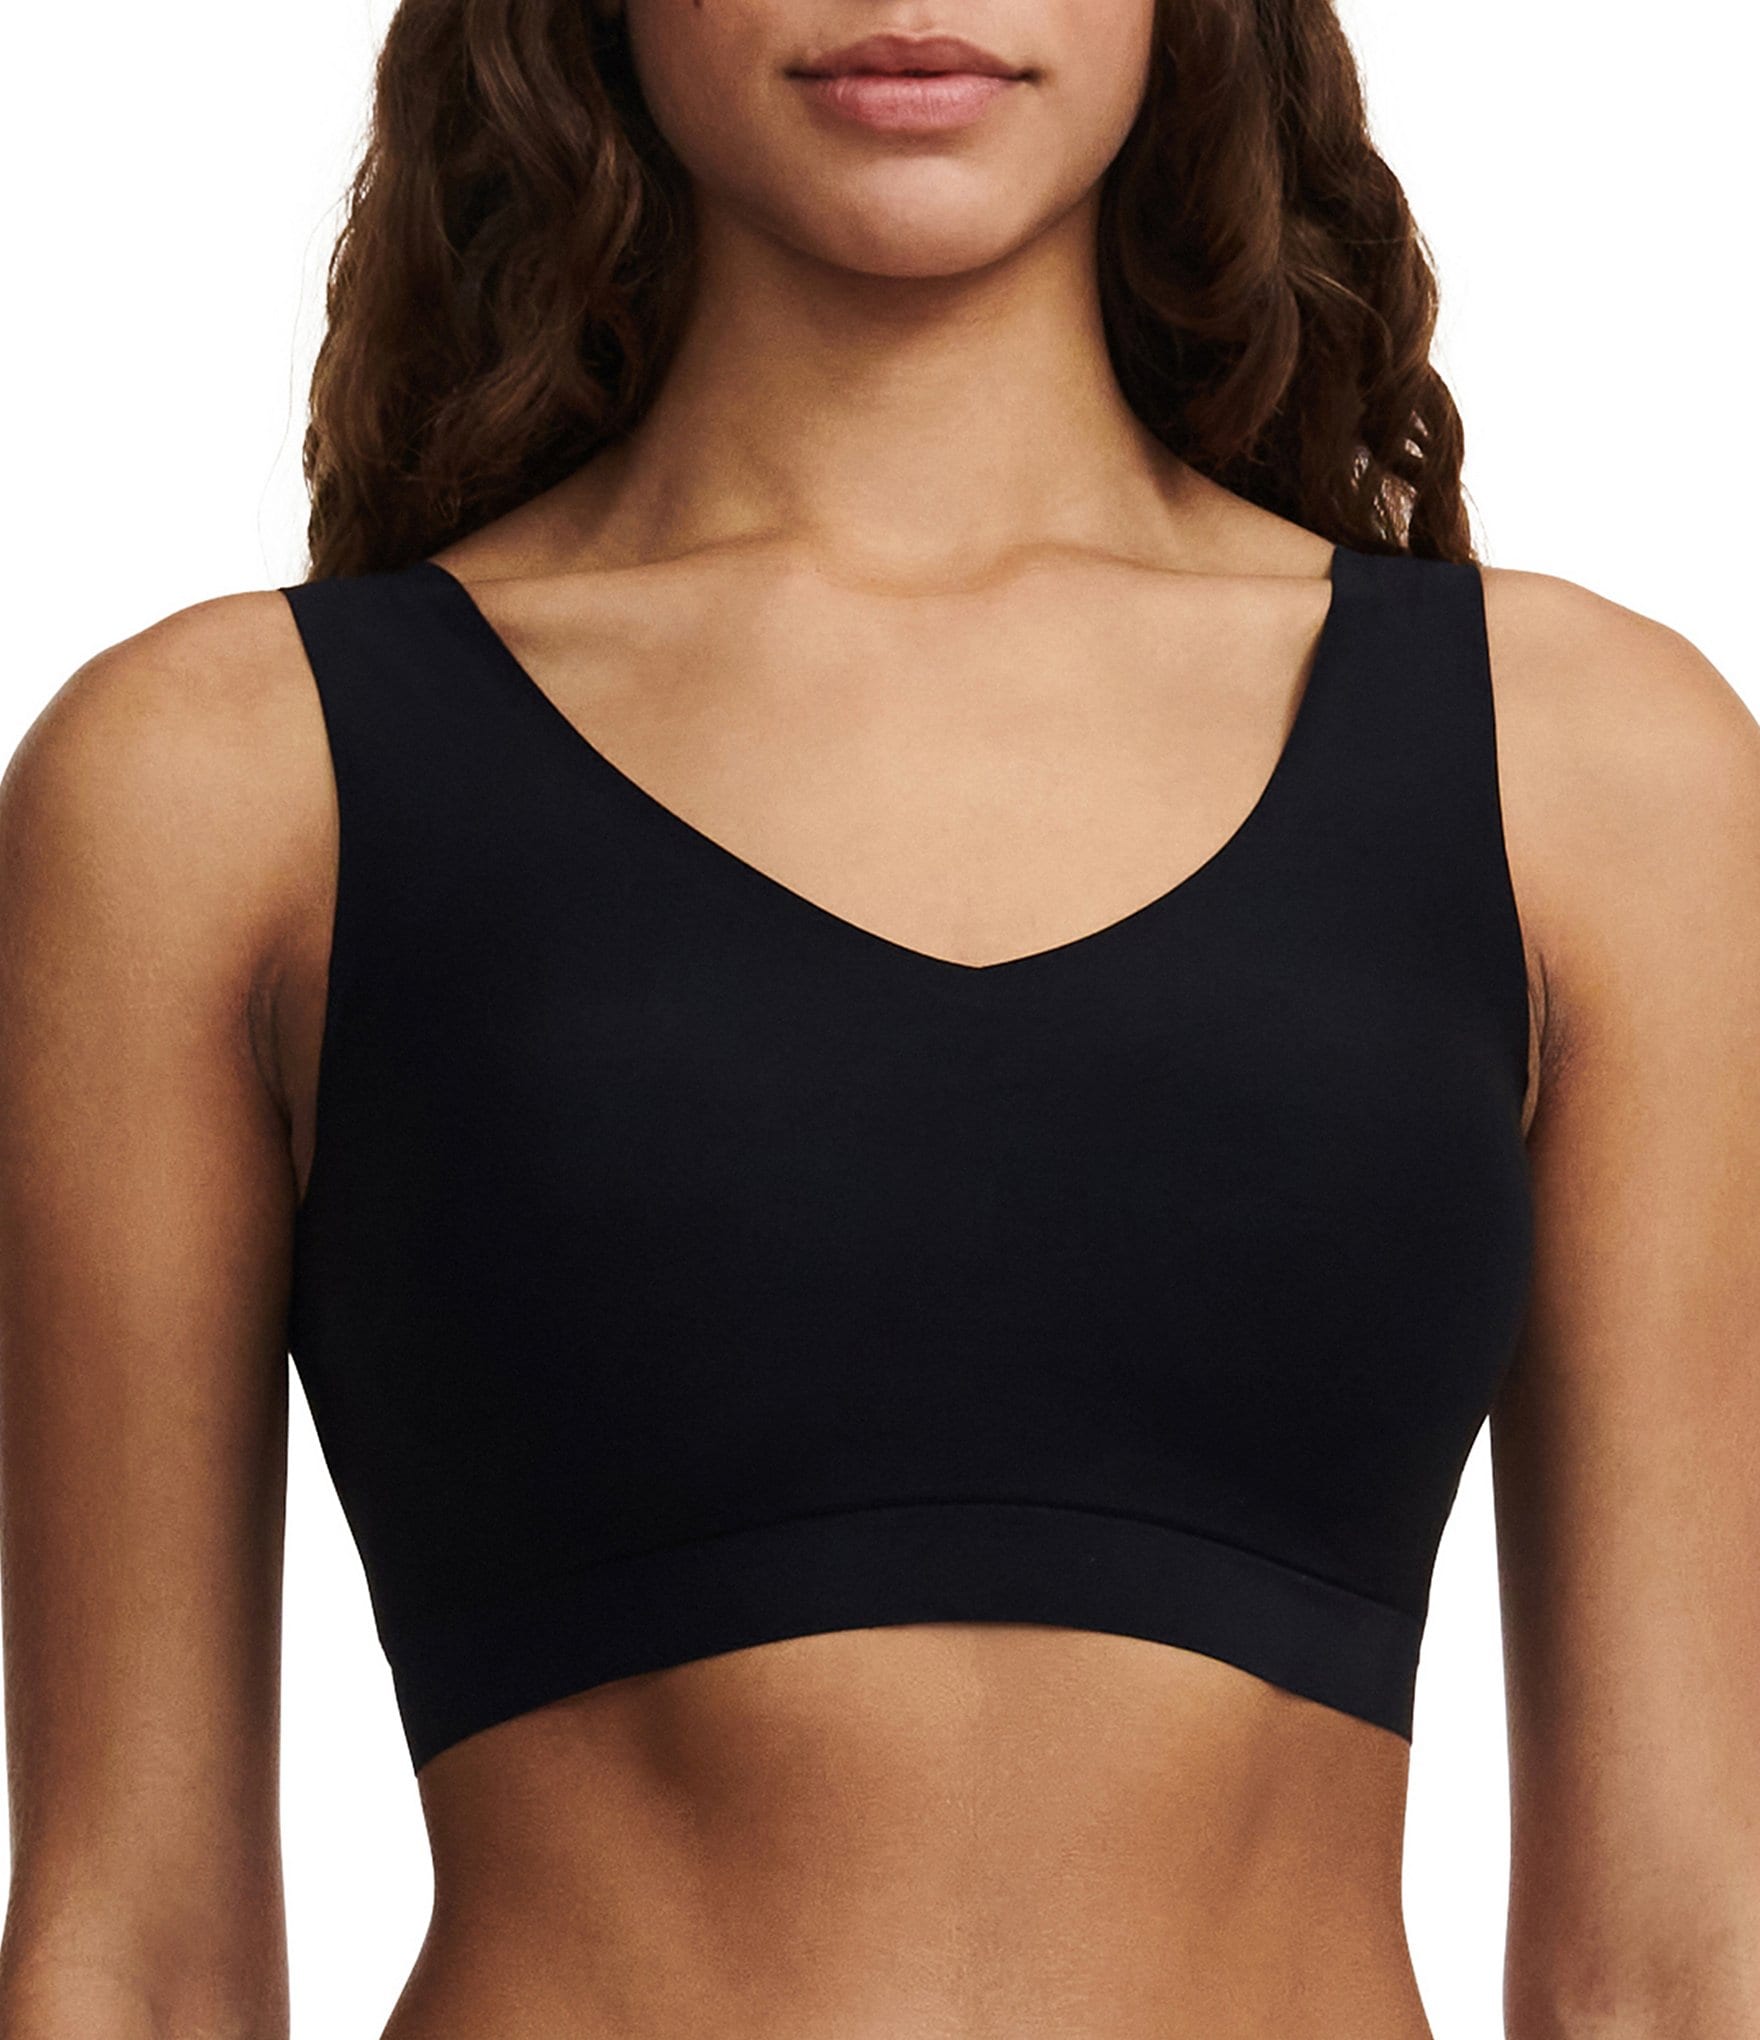 Women's Super-comfy Sable Black Strappy Bra Wireless and Seamless Design  Perfect for Daily Life, Home Working, Sports or Maternity. 